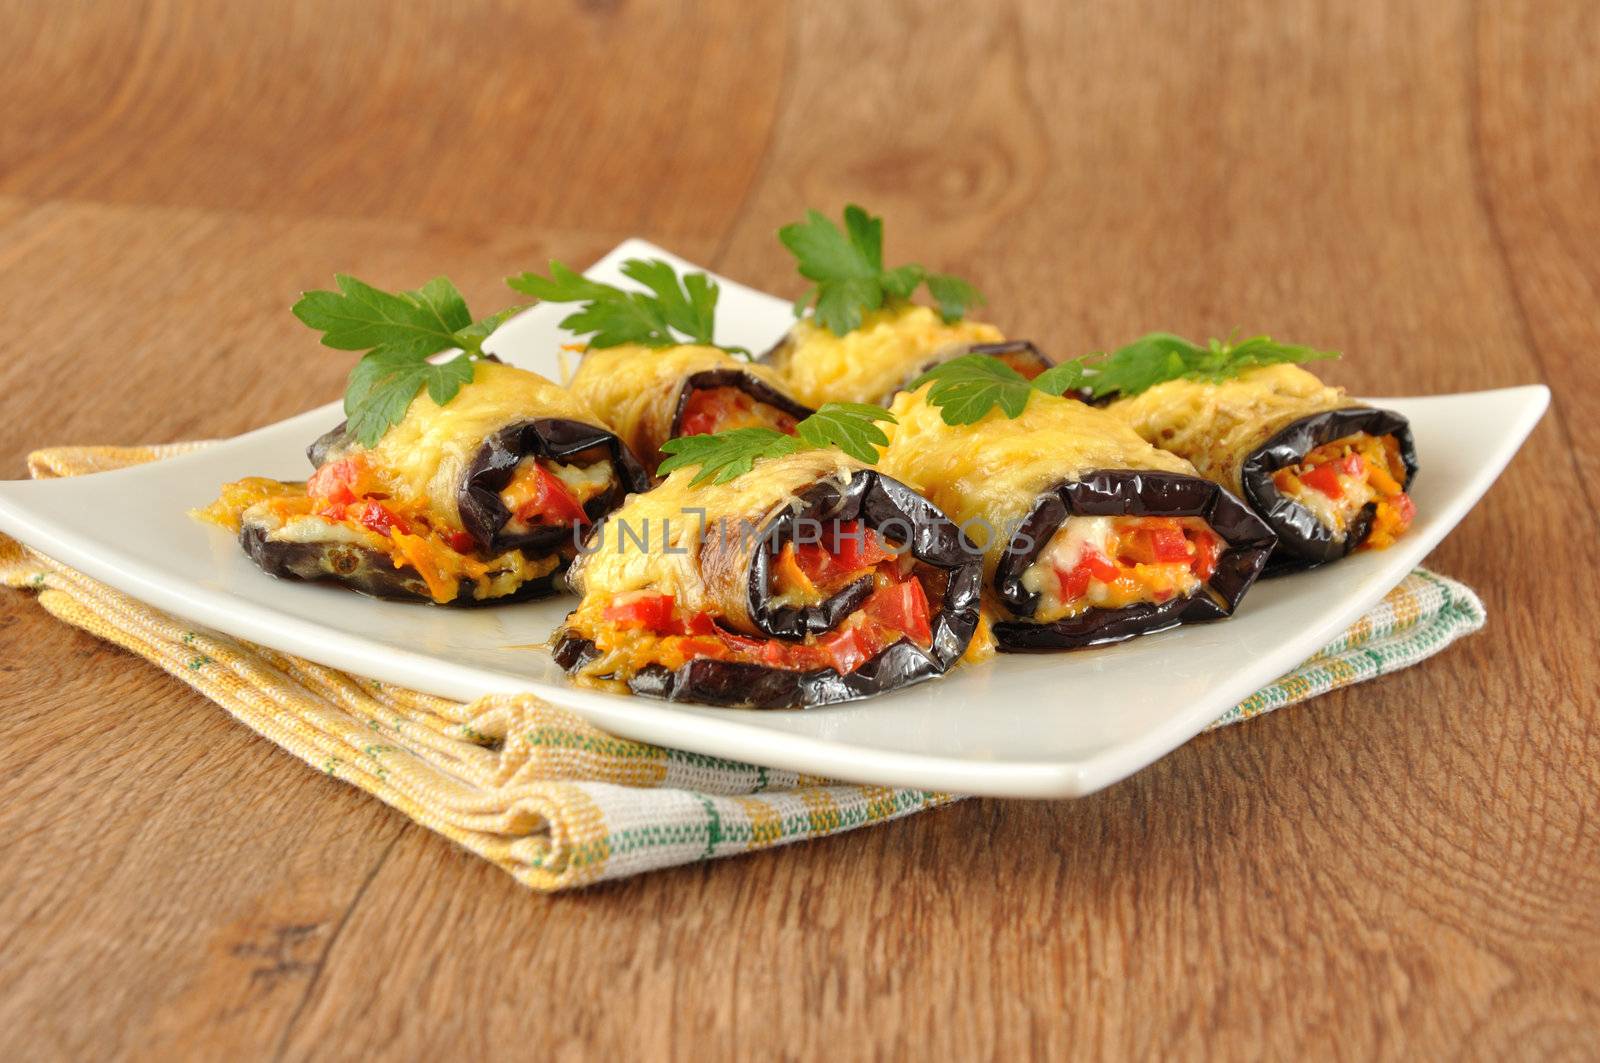 Stuffed eggplant with tomatoes, carrots and cheese